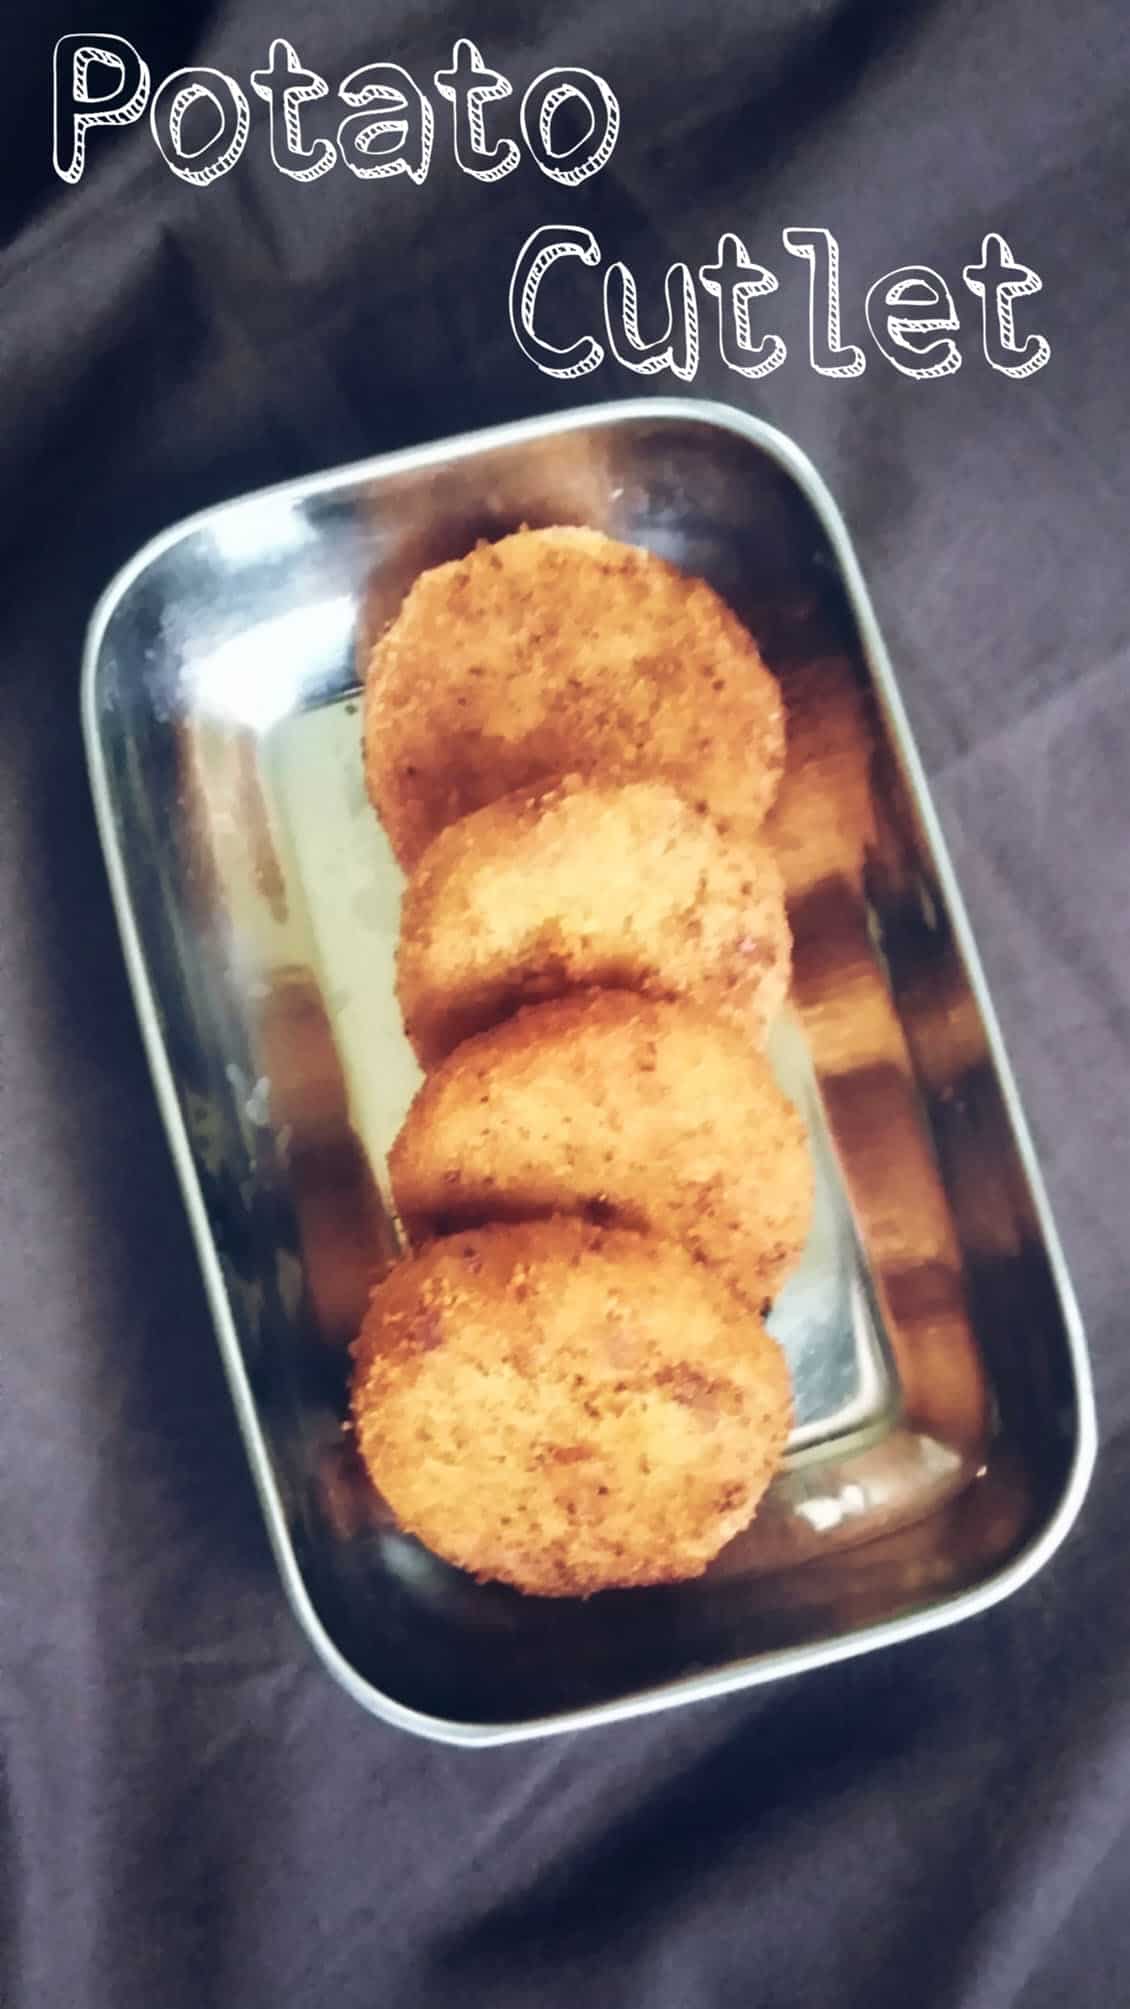 aloo cutlet in a plate